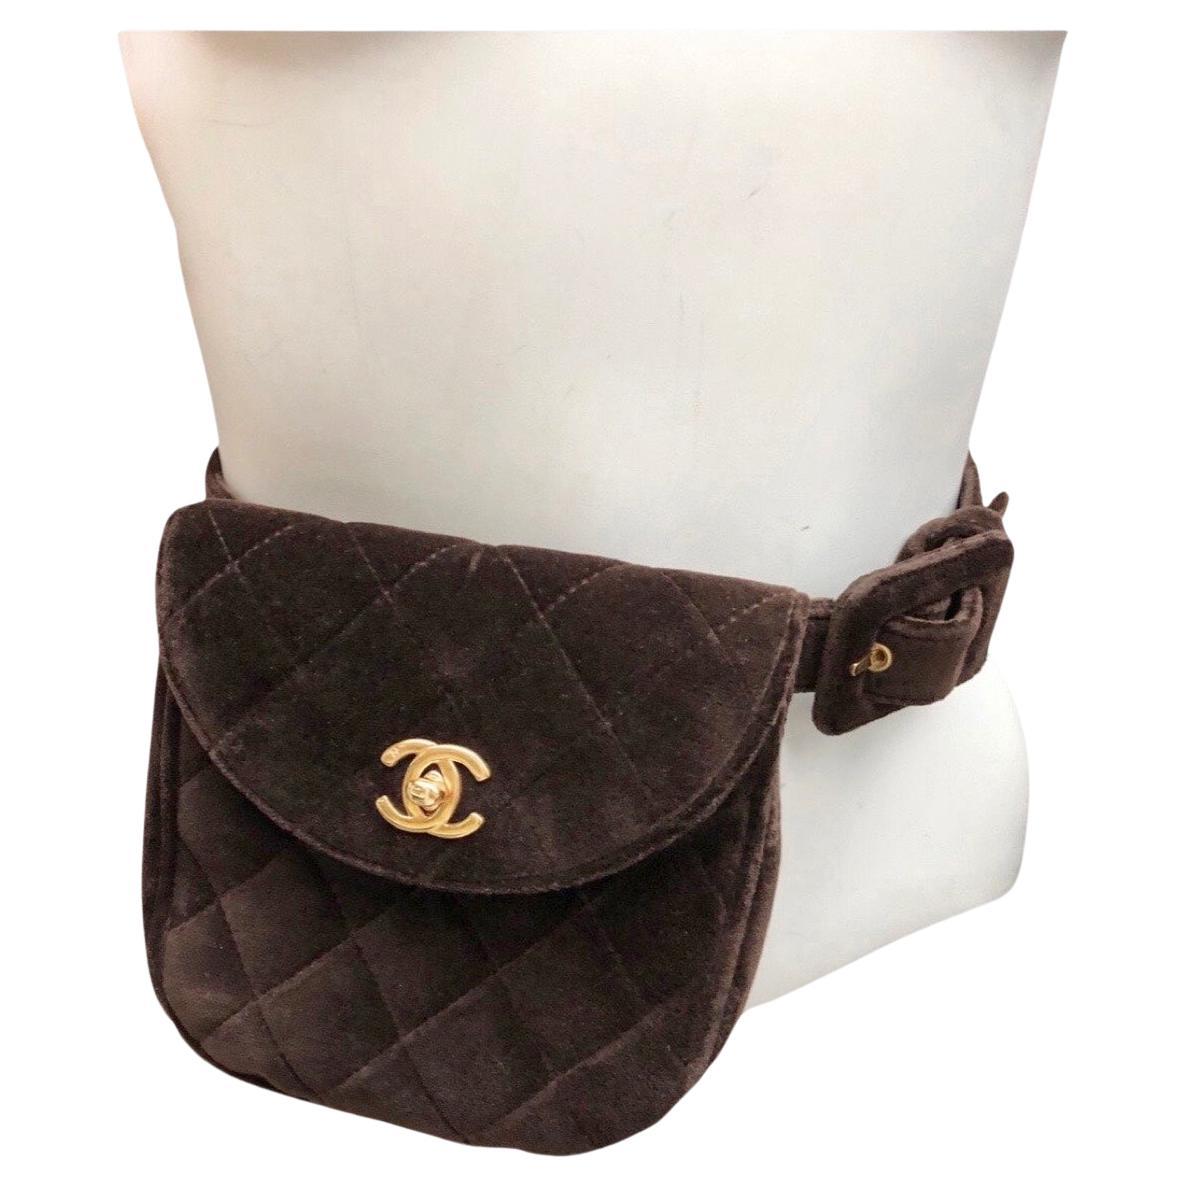 - Chanel brown velvet quilted belt bag from year 1996 to 1997 collection. 

- Gold CC hardware turn-lock flap closure.

- Brown velvet buckle belt. 

- Brown lambskin leather interior with zip pocket closure.

- Belt length: 86.5 x 2.5 cm. Belt